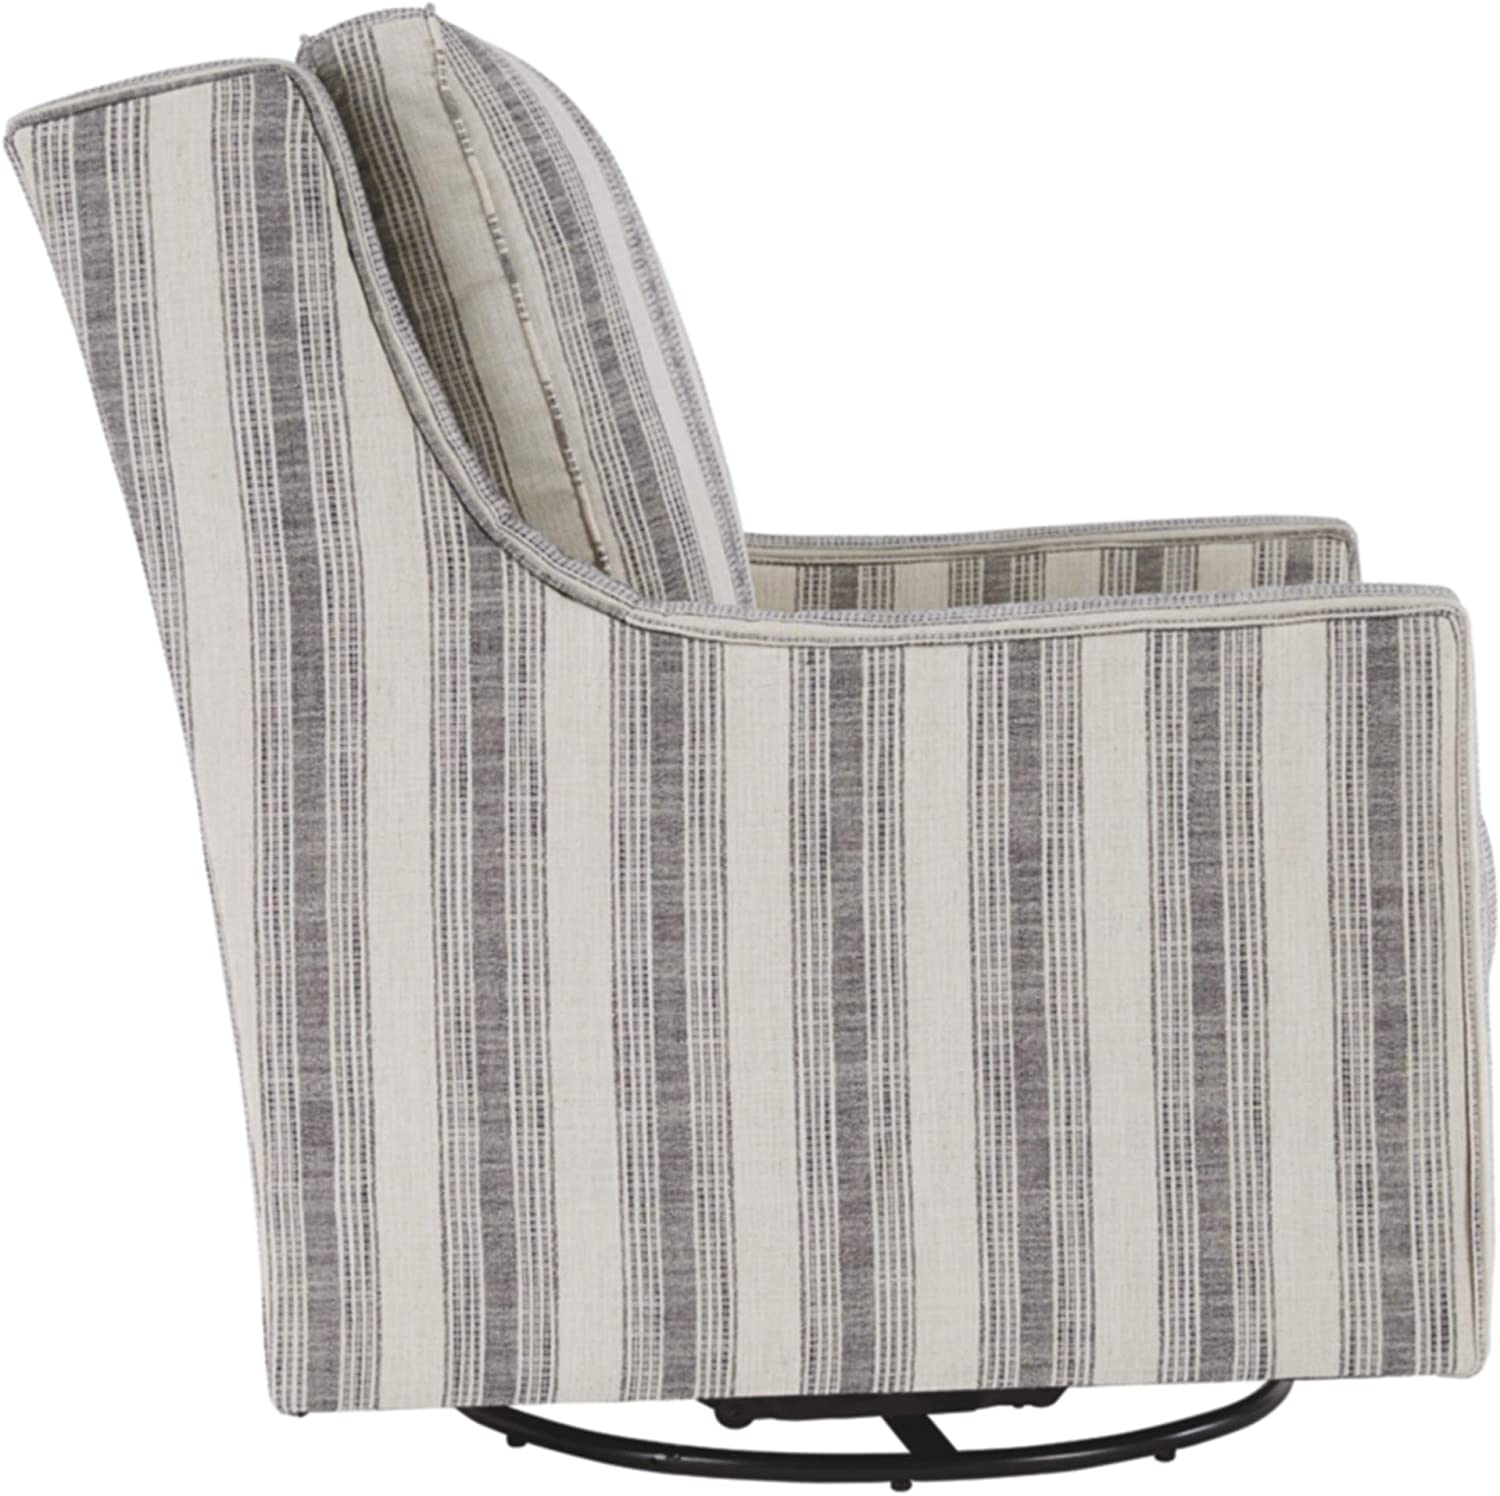 Signature Design Kambria Striped Upholstered Swivel Accent Glider Chair, Ivory & Black - $250